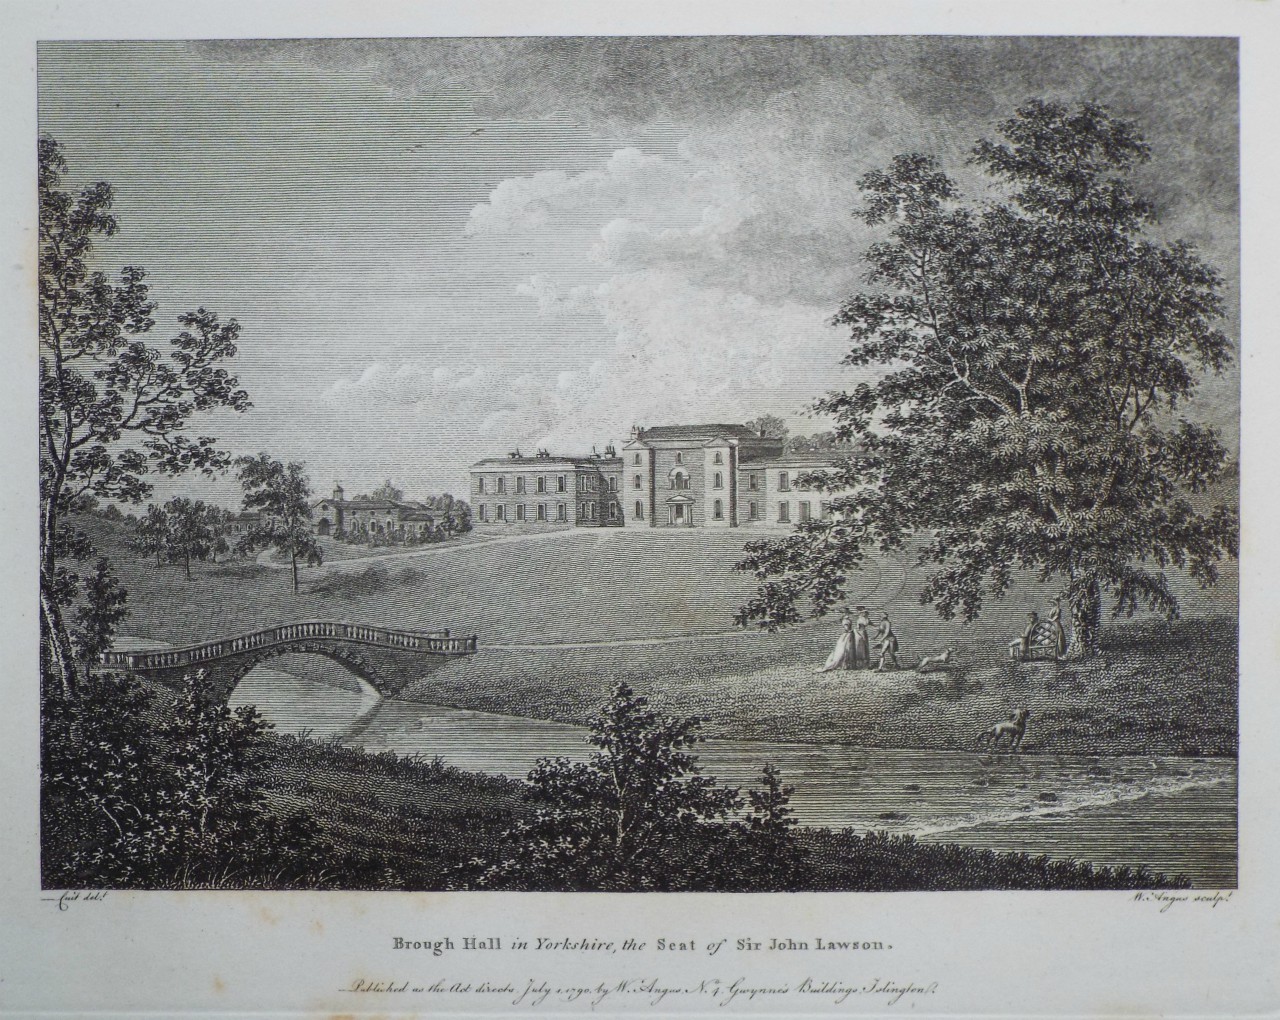 Print - Brough Hall in Yorkshire, the Seat of Sir John Lawson. - Angus